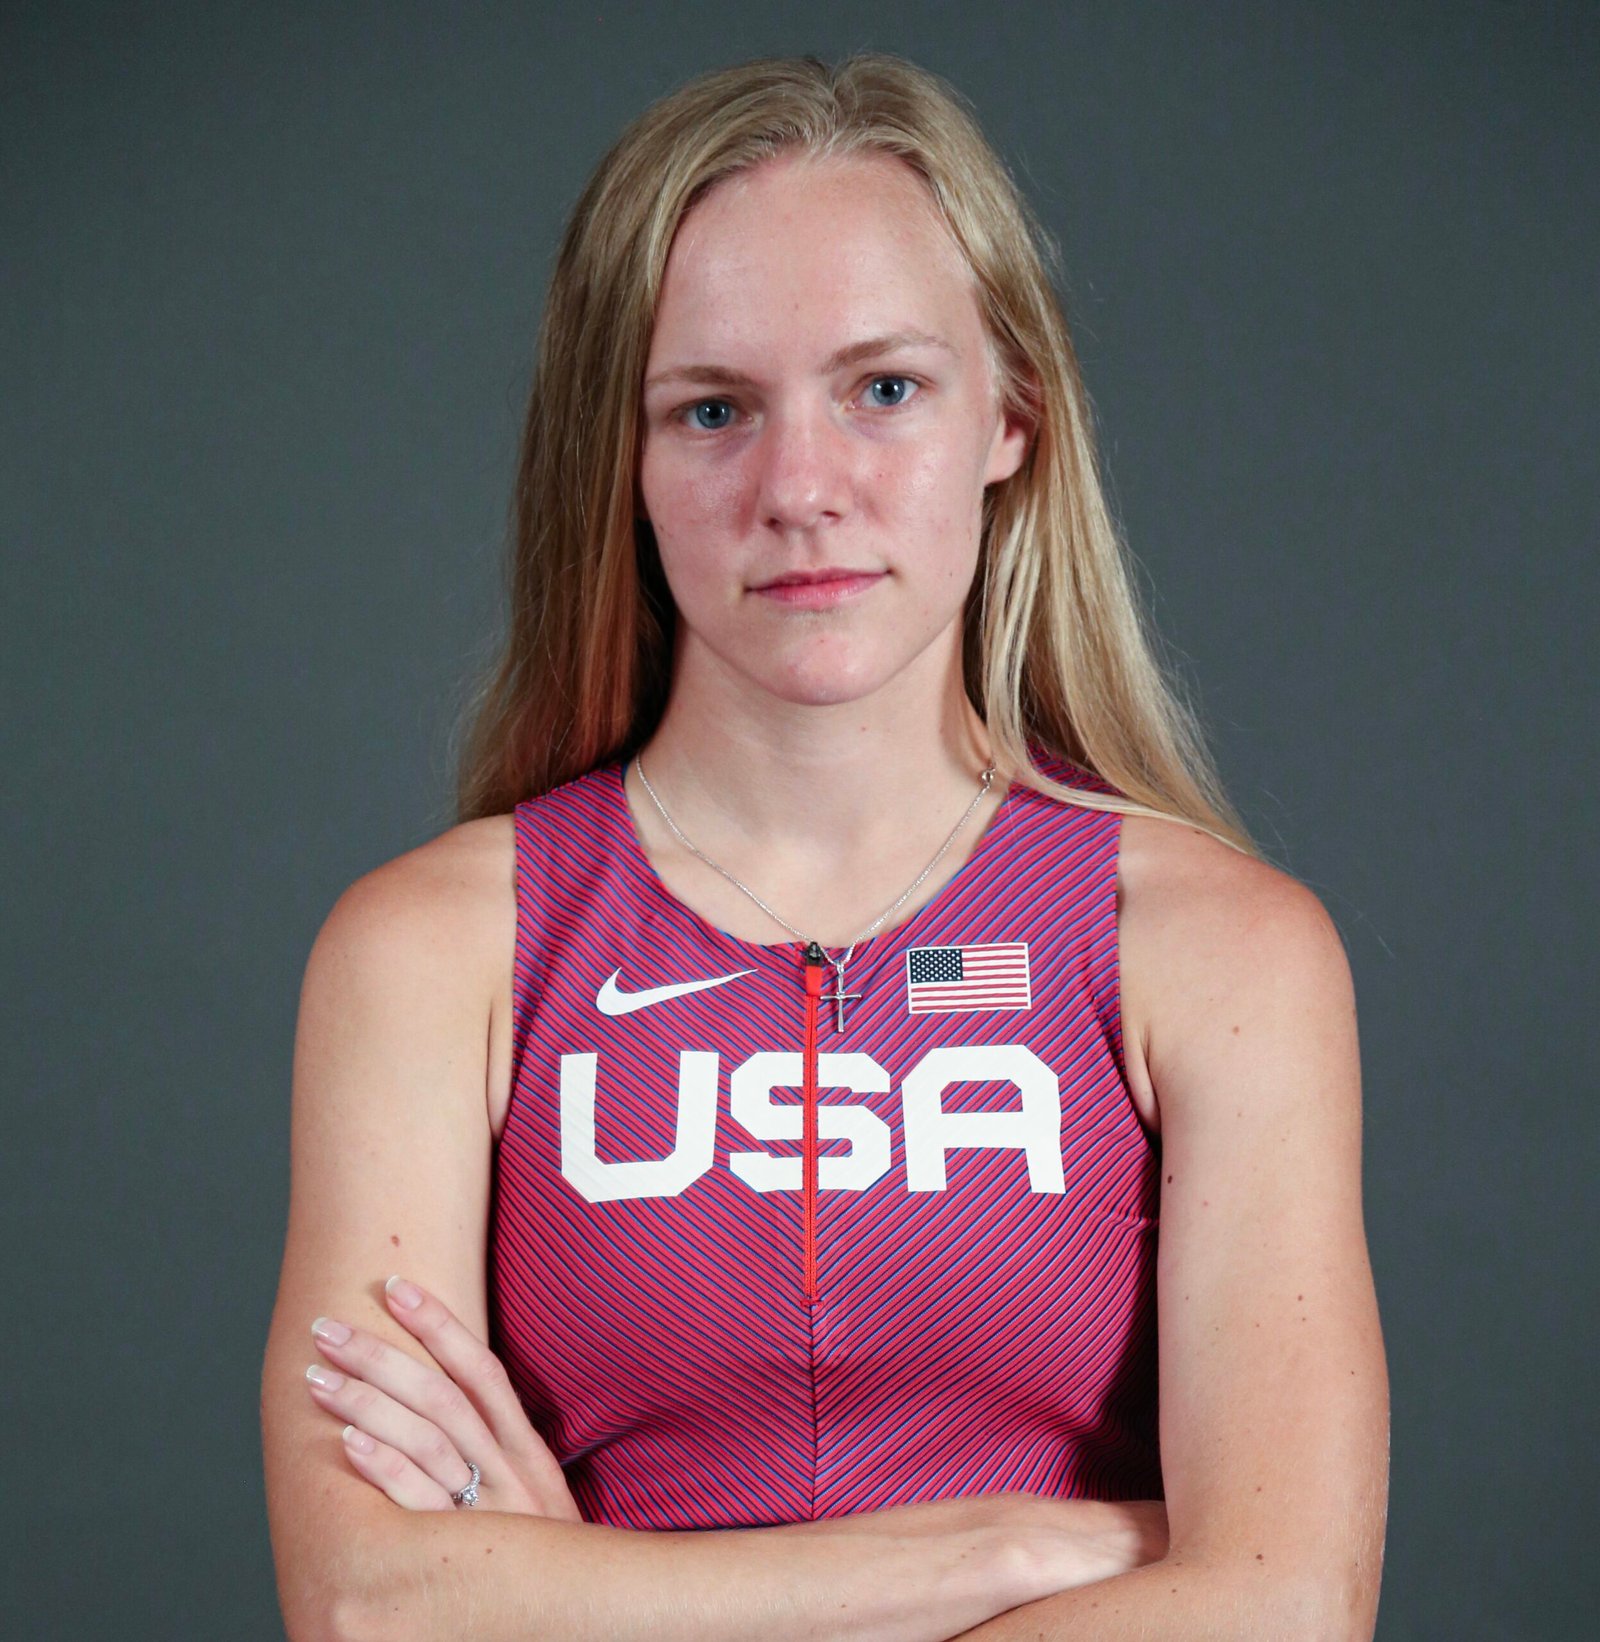 Jessica Heims, a white and blonde woman is looking at the camera, wearing a red USA track shirt.